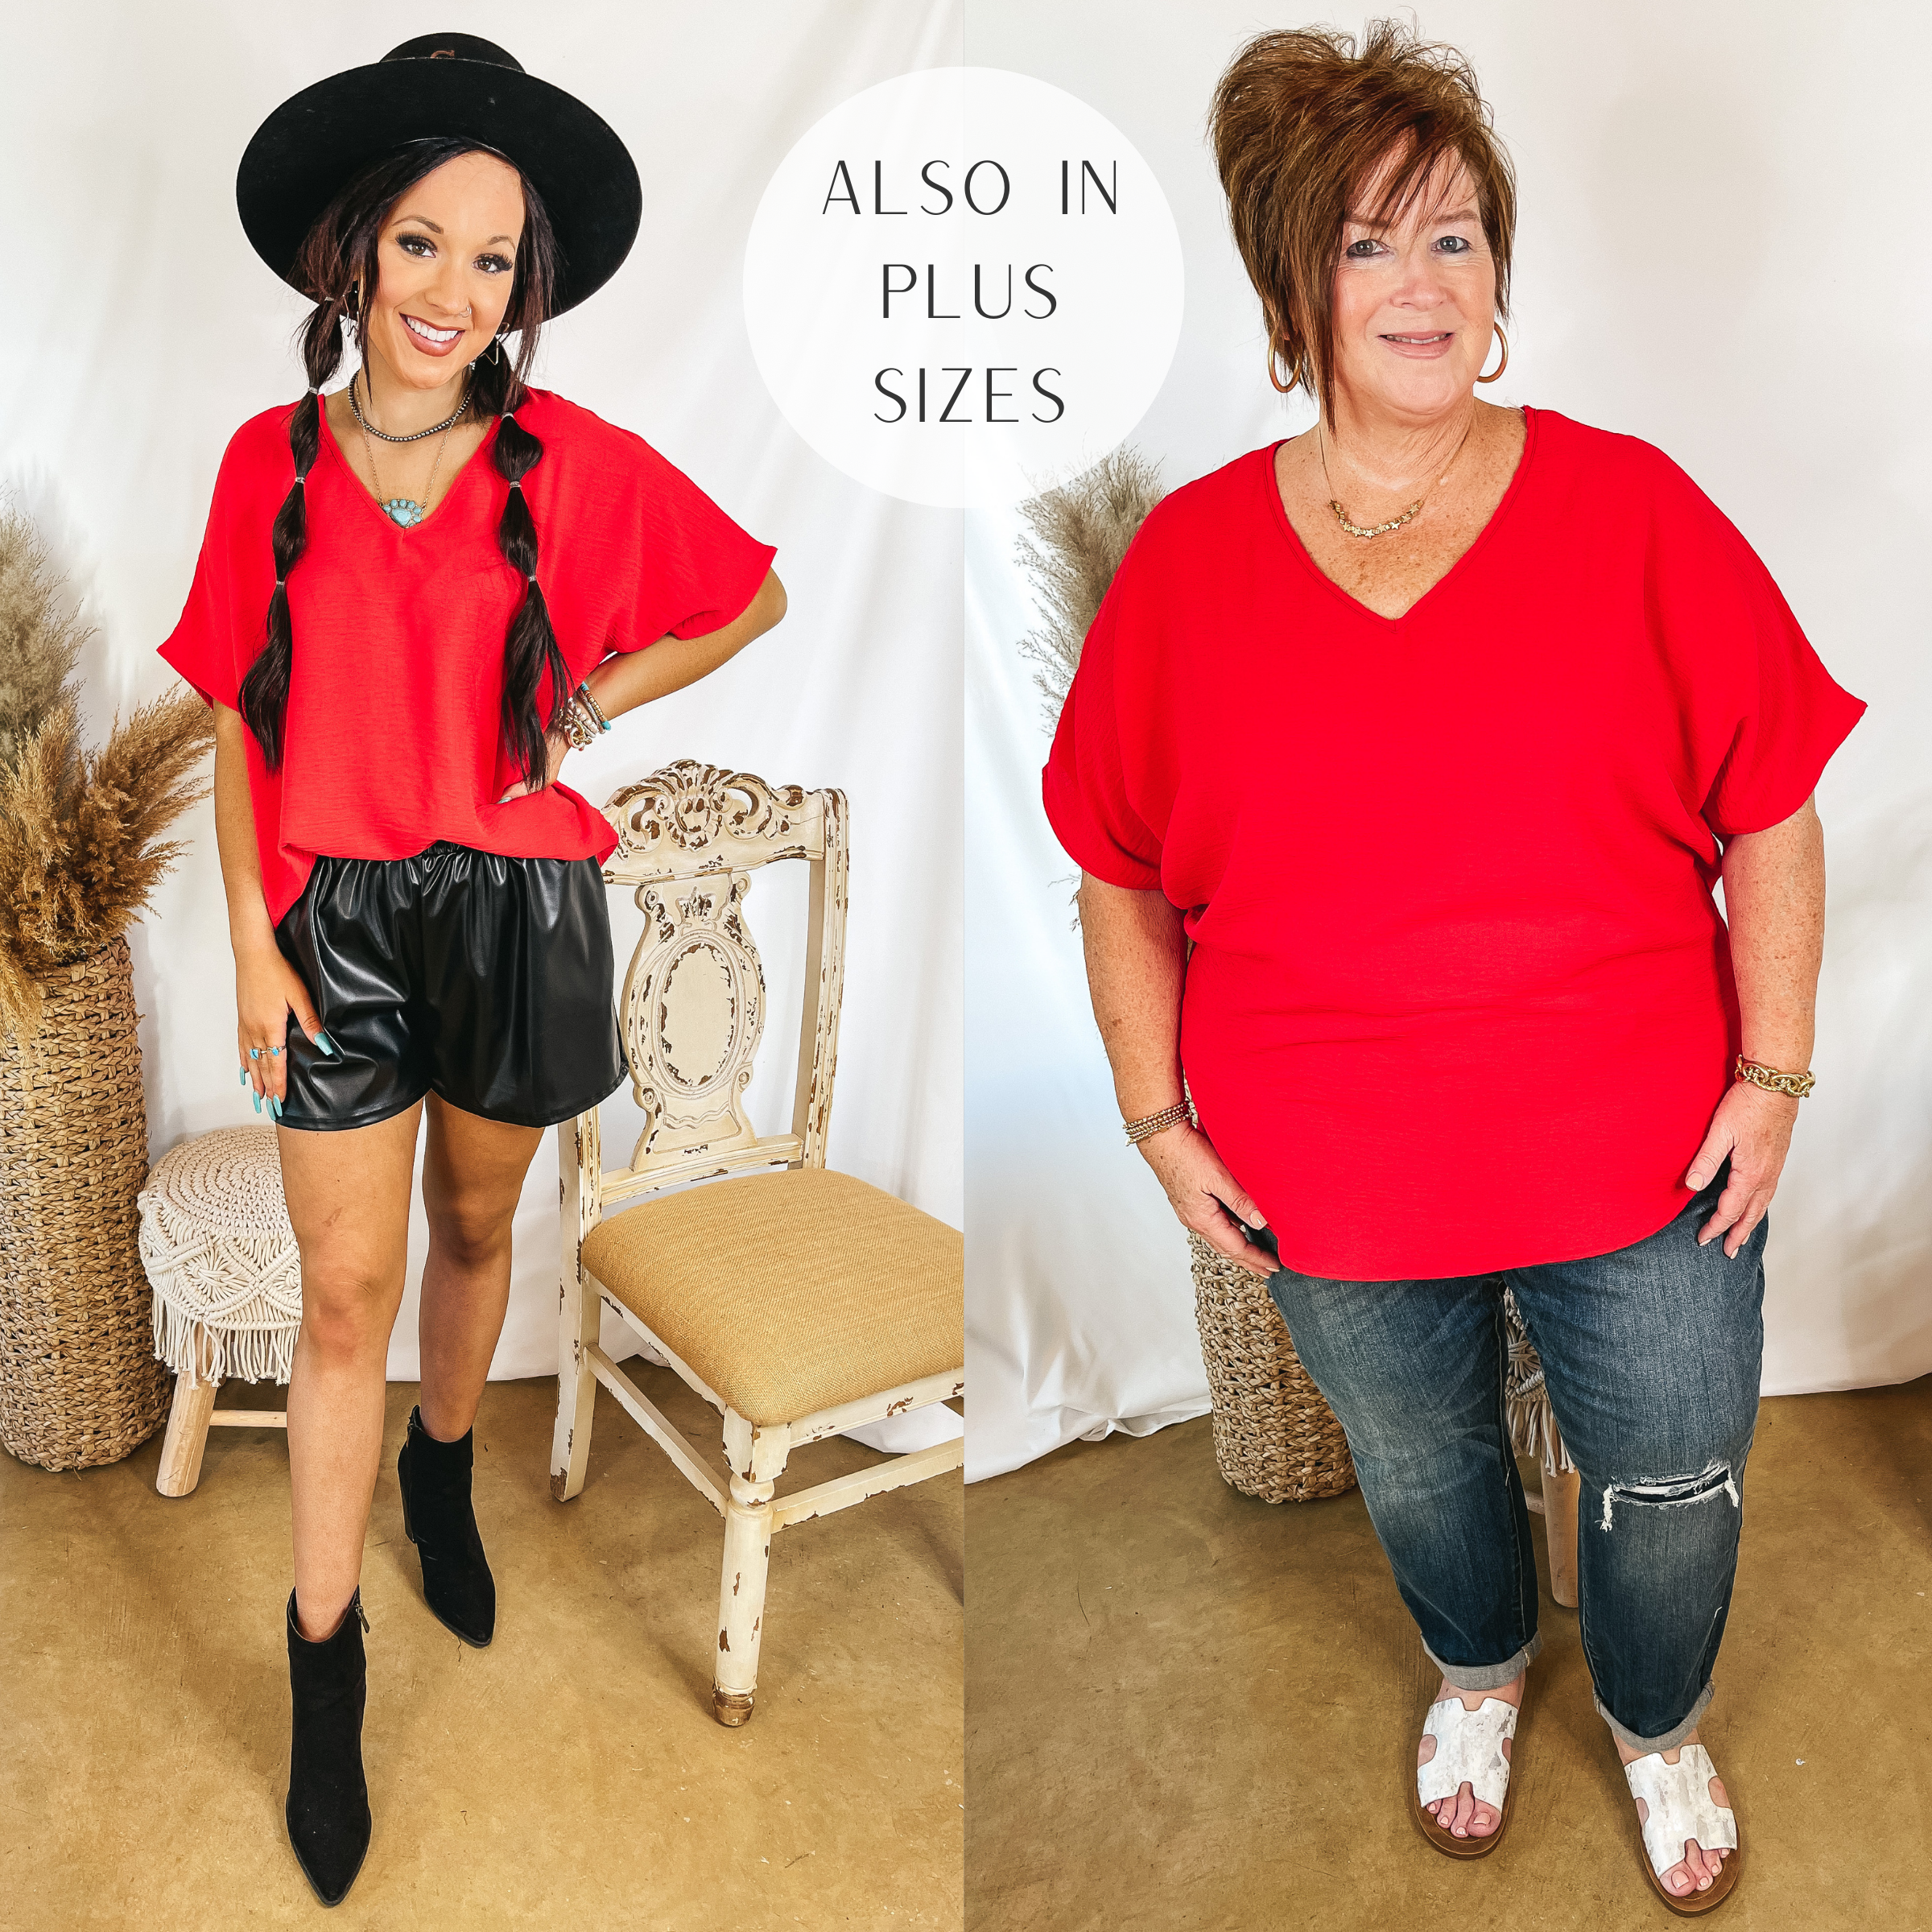 Models are wearing a red v neck top. Size small model has it paired with black leather shorts, black booties, and a black hat. Plus size model has it paired with boyfriend jeans, white sandals, and gold jewelry.